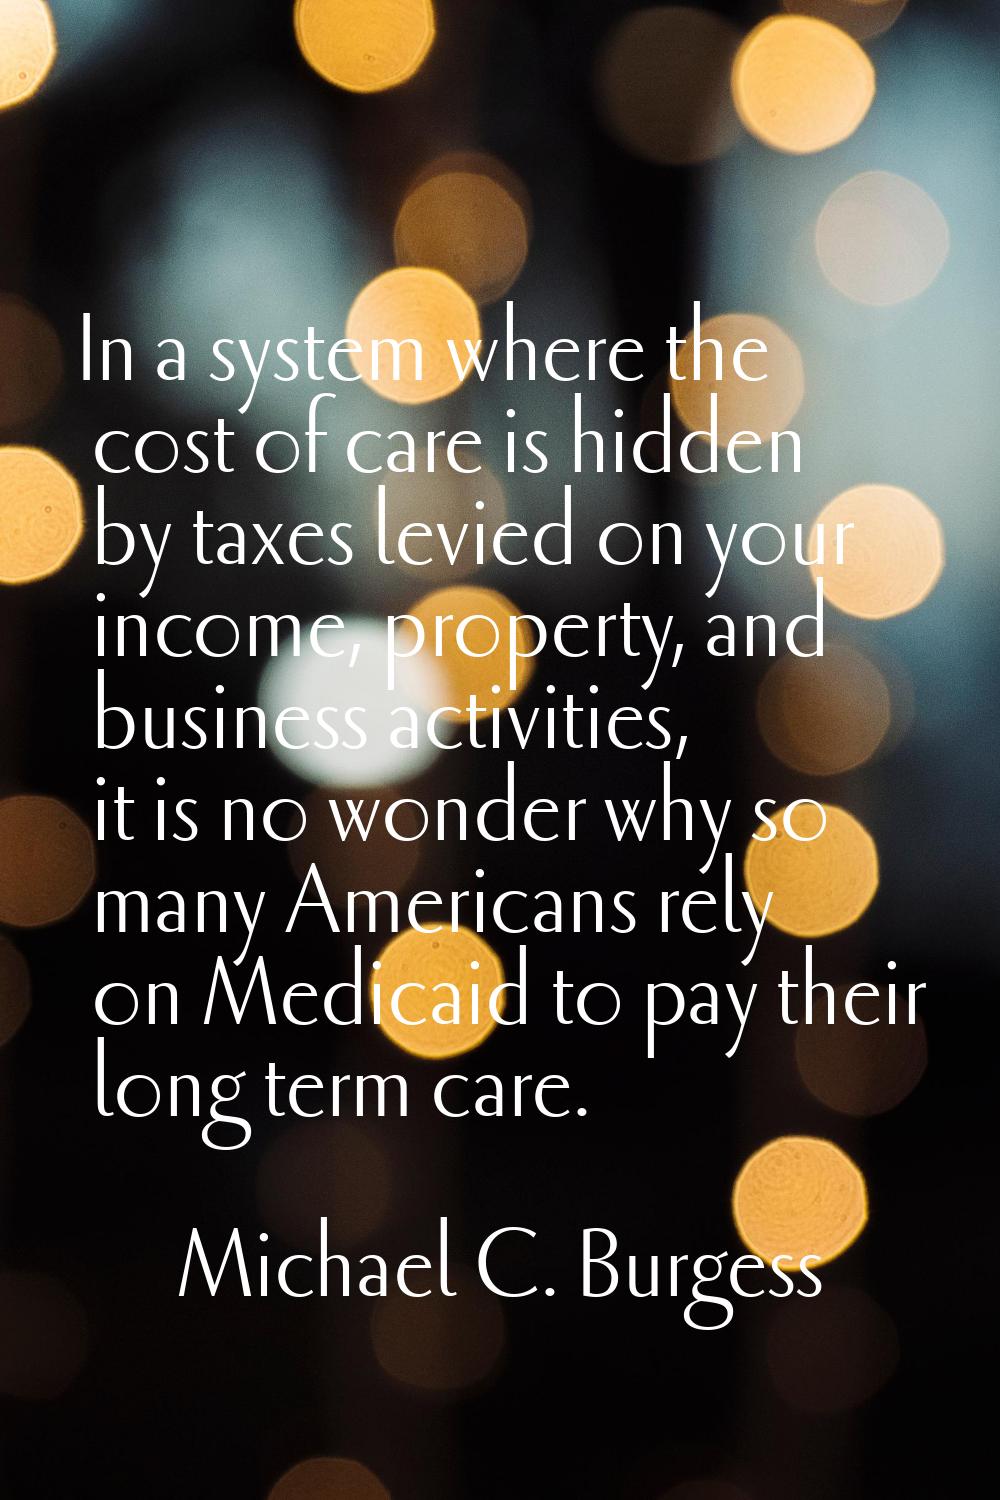 In a system where the cost of care is hidden by taxes levied on your income, property, and business